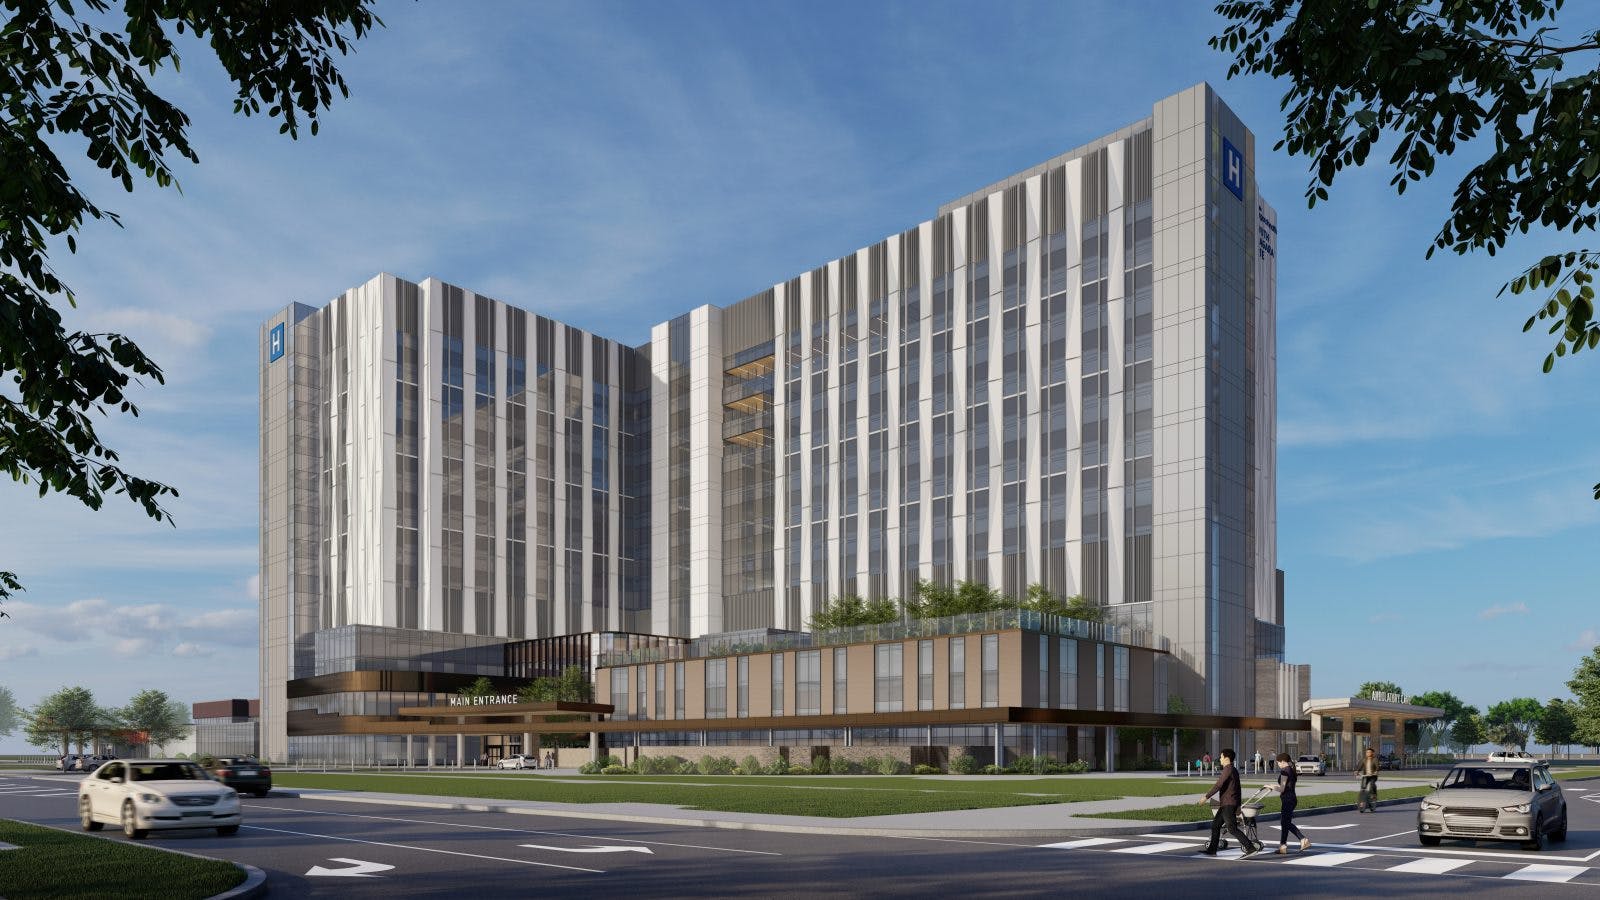 An artistic rendering of front exterior of the South Niagara Hospital project